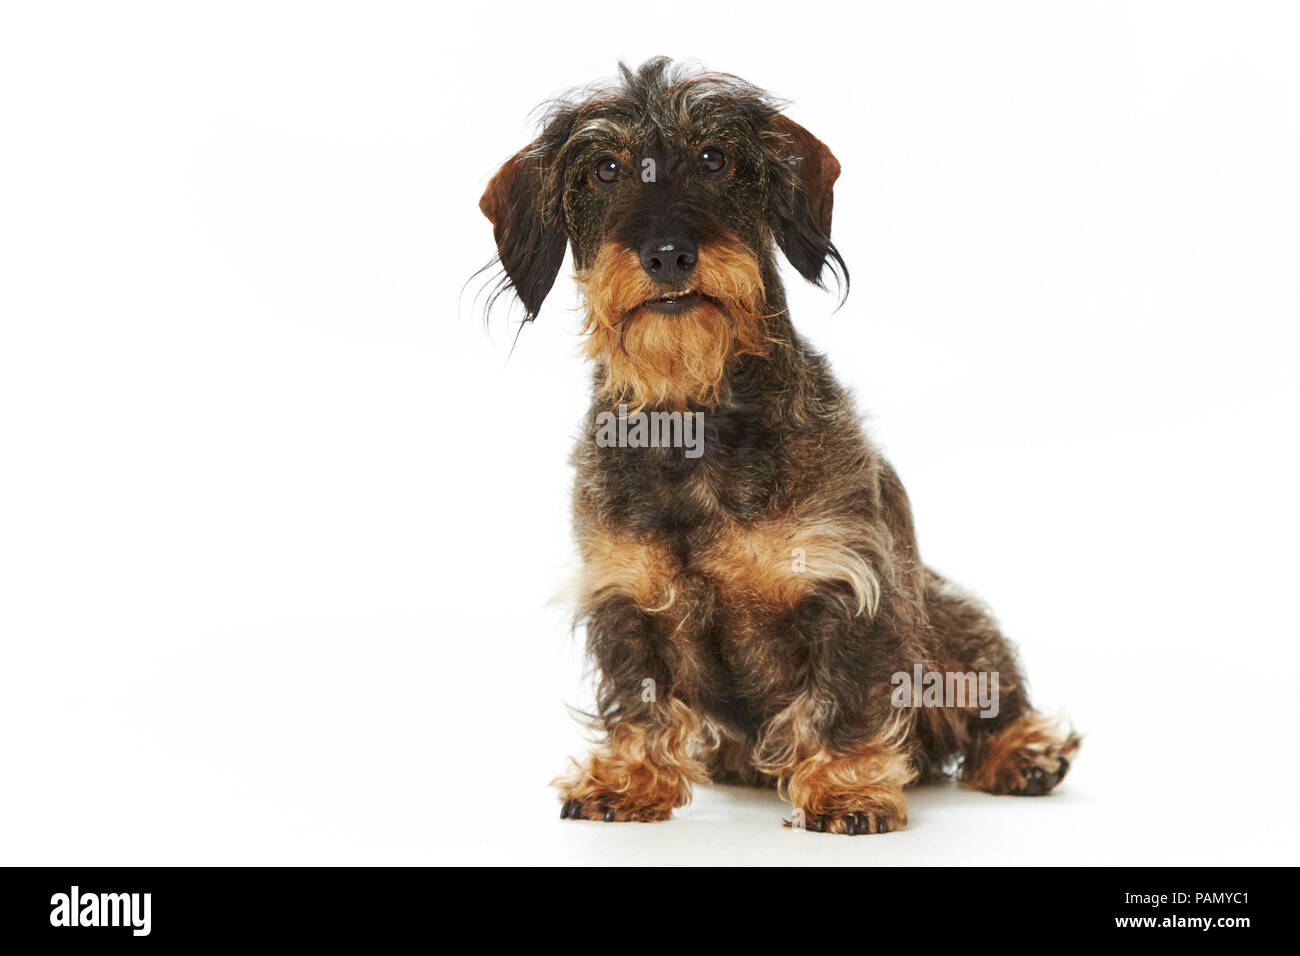 Wire-haired Dachshund. Adult dog sitting. Studio picture against a white background. Germany Stock Photo